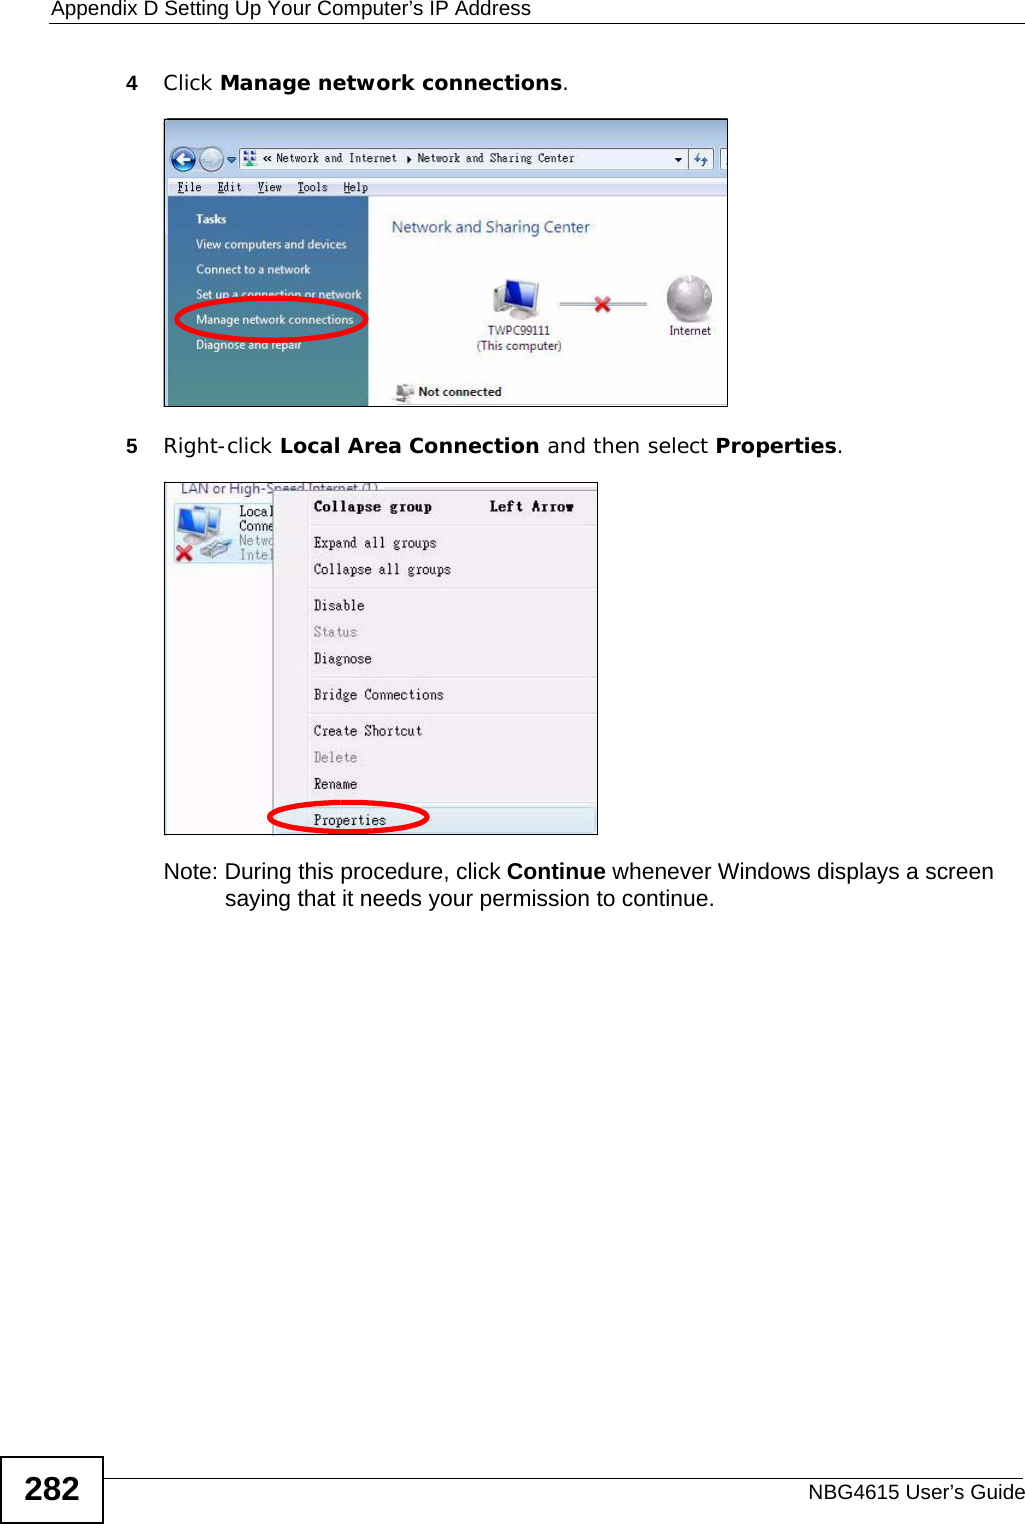 Appendix D Setting Up Your Computer’s IP AddressNBG4615 User’s Guide2824Click Manage network connections.5Right-click Local Area Connection and then select Properties.Note: During this procedure, click Continue whenever Windows displays a screen saying that it needs your permission to continue.